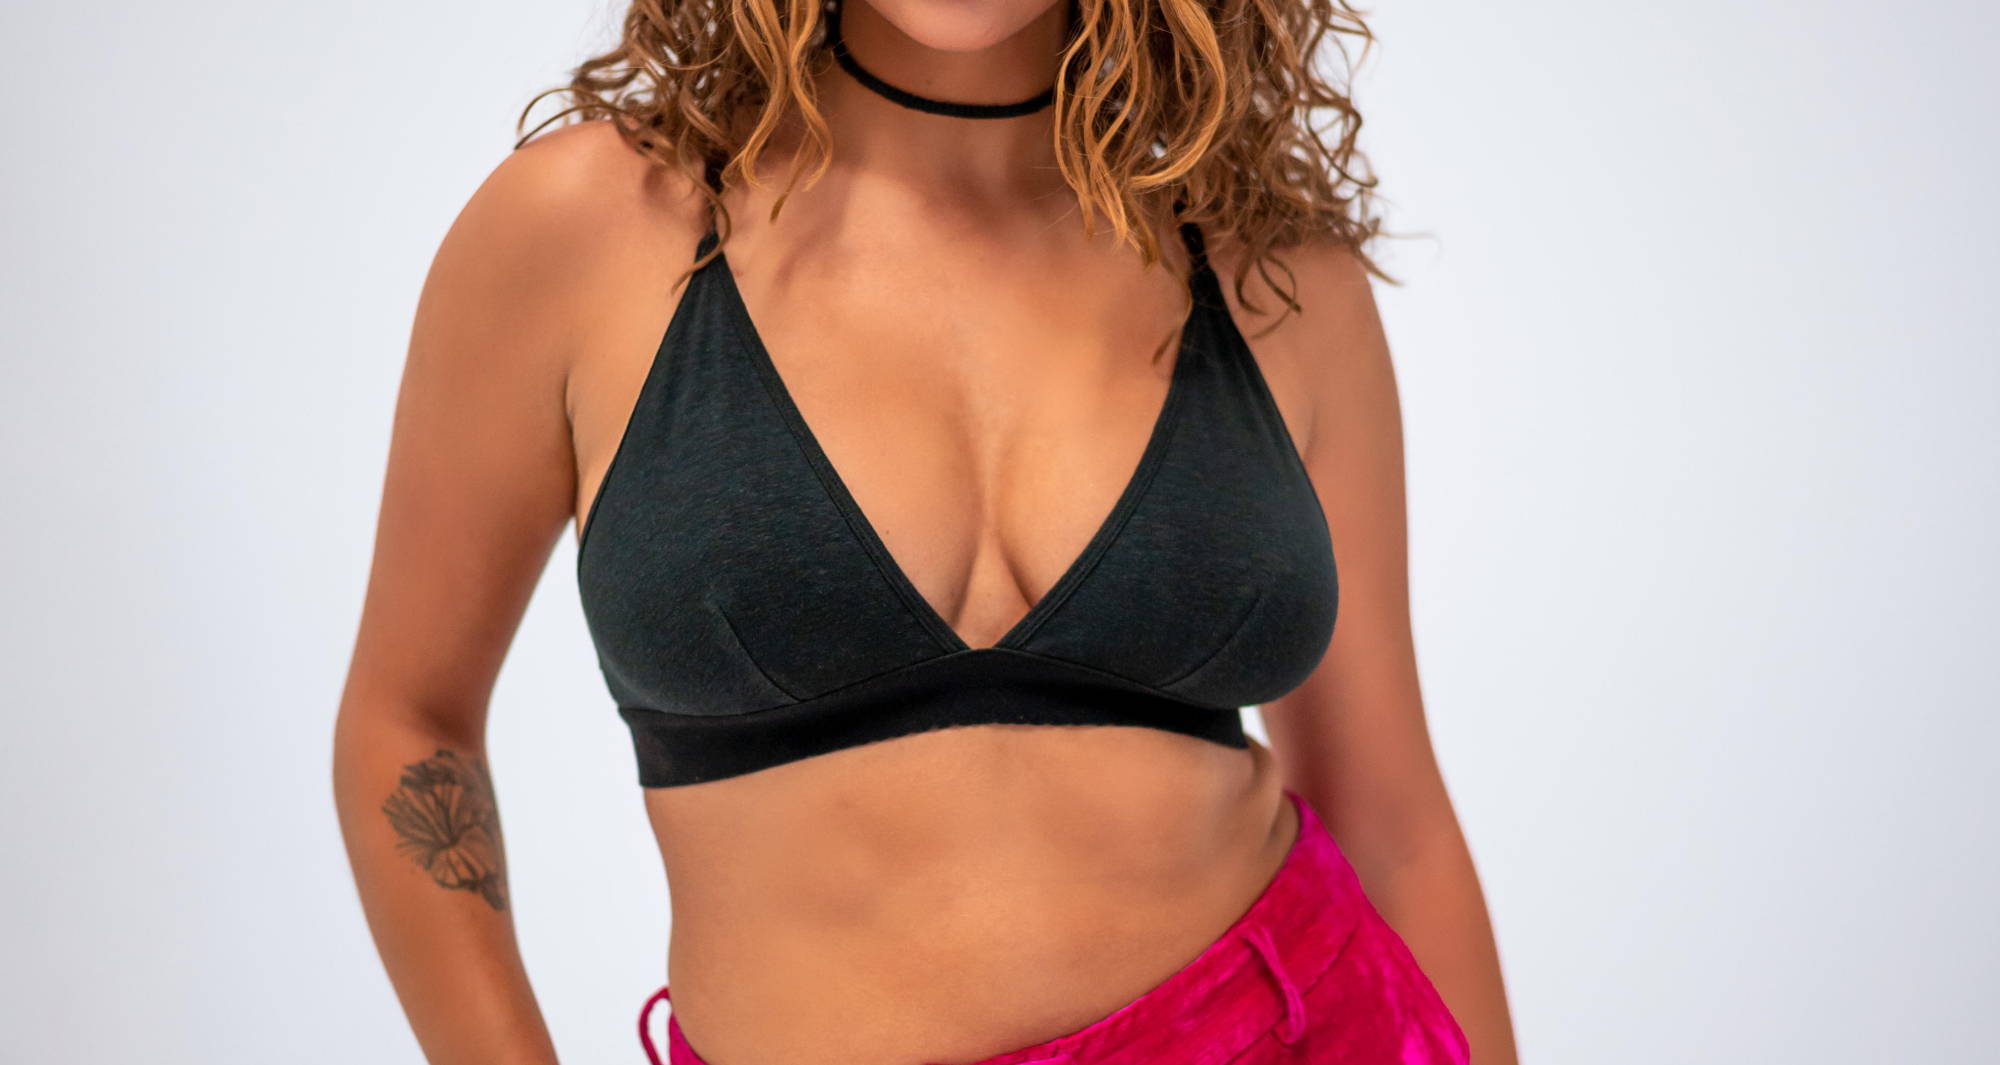 Woman with curly hair wearing a black bralette and choker necklace.